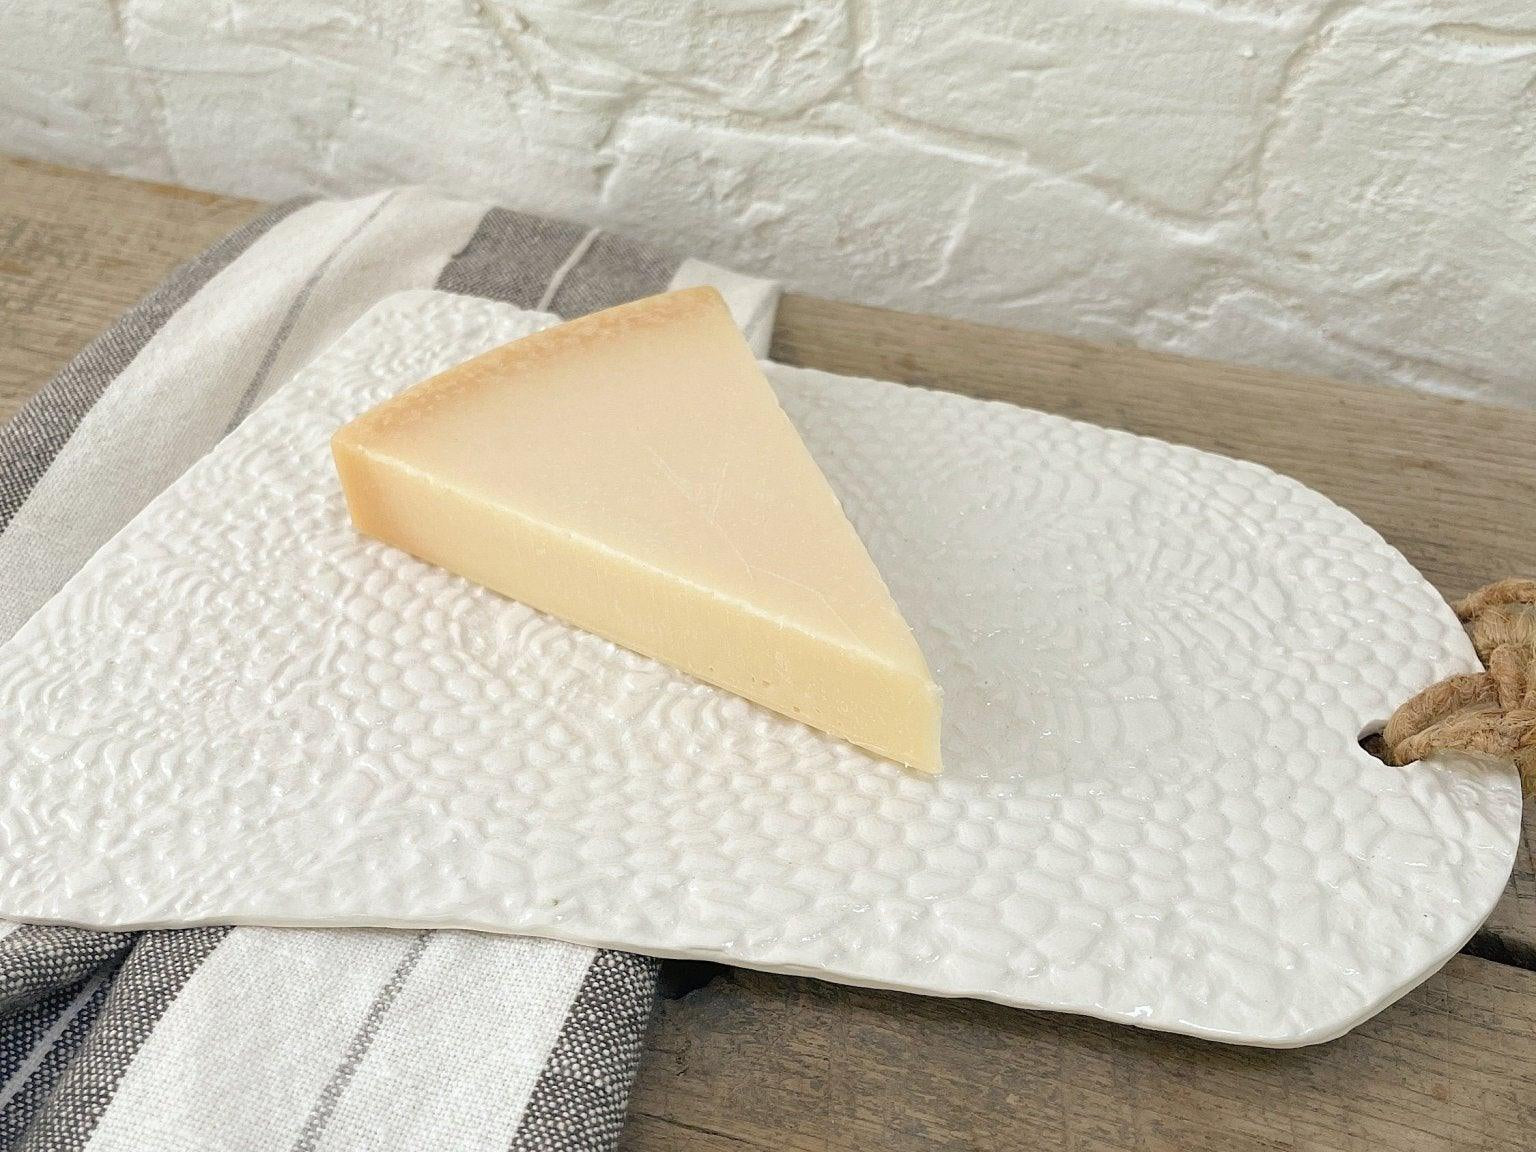 Lace Textured Cheeseboard MuddyHeart